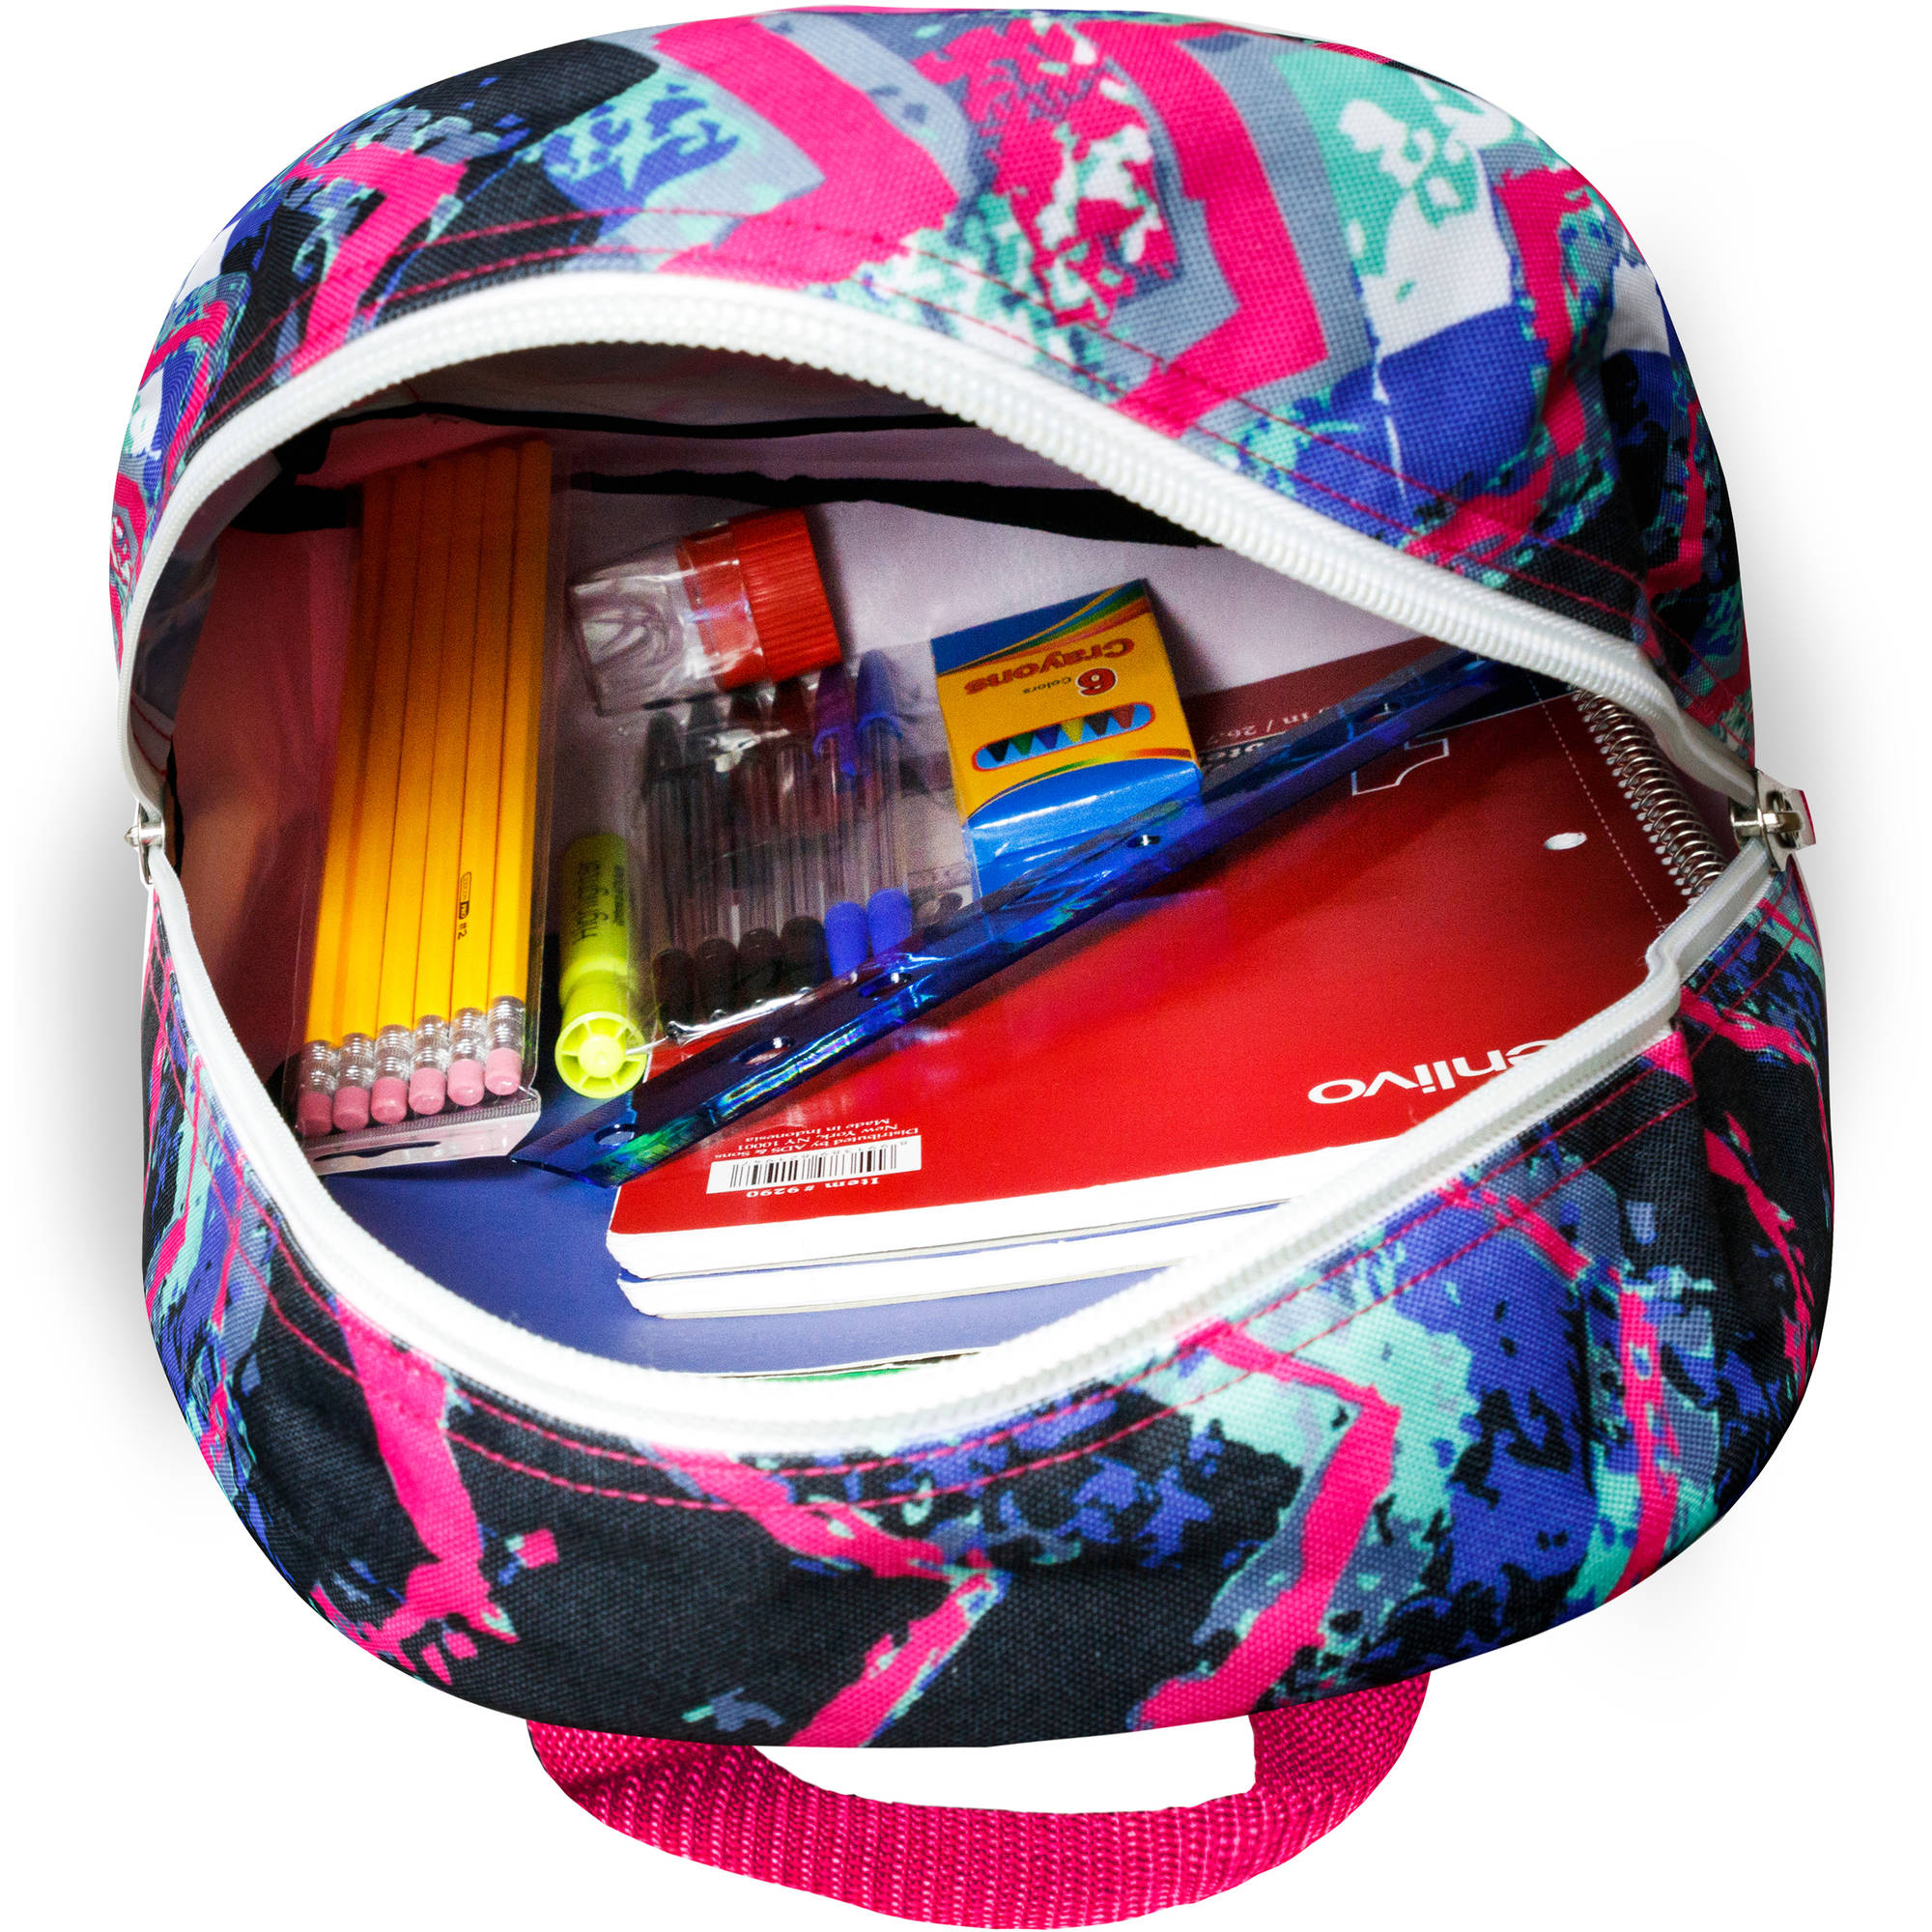 17 Inch Chevron Printed Backpack with Front Accessory Pocket - image 3 of 3